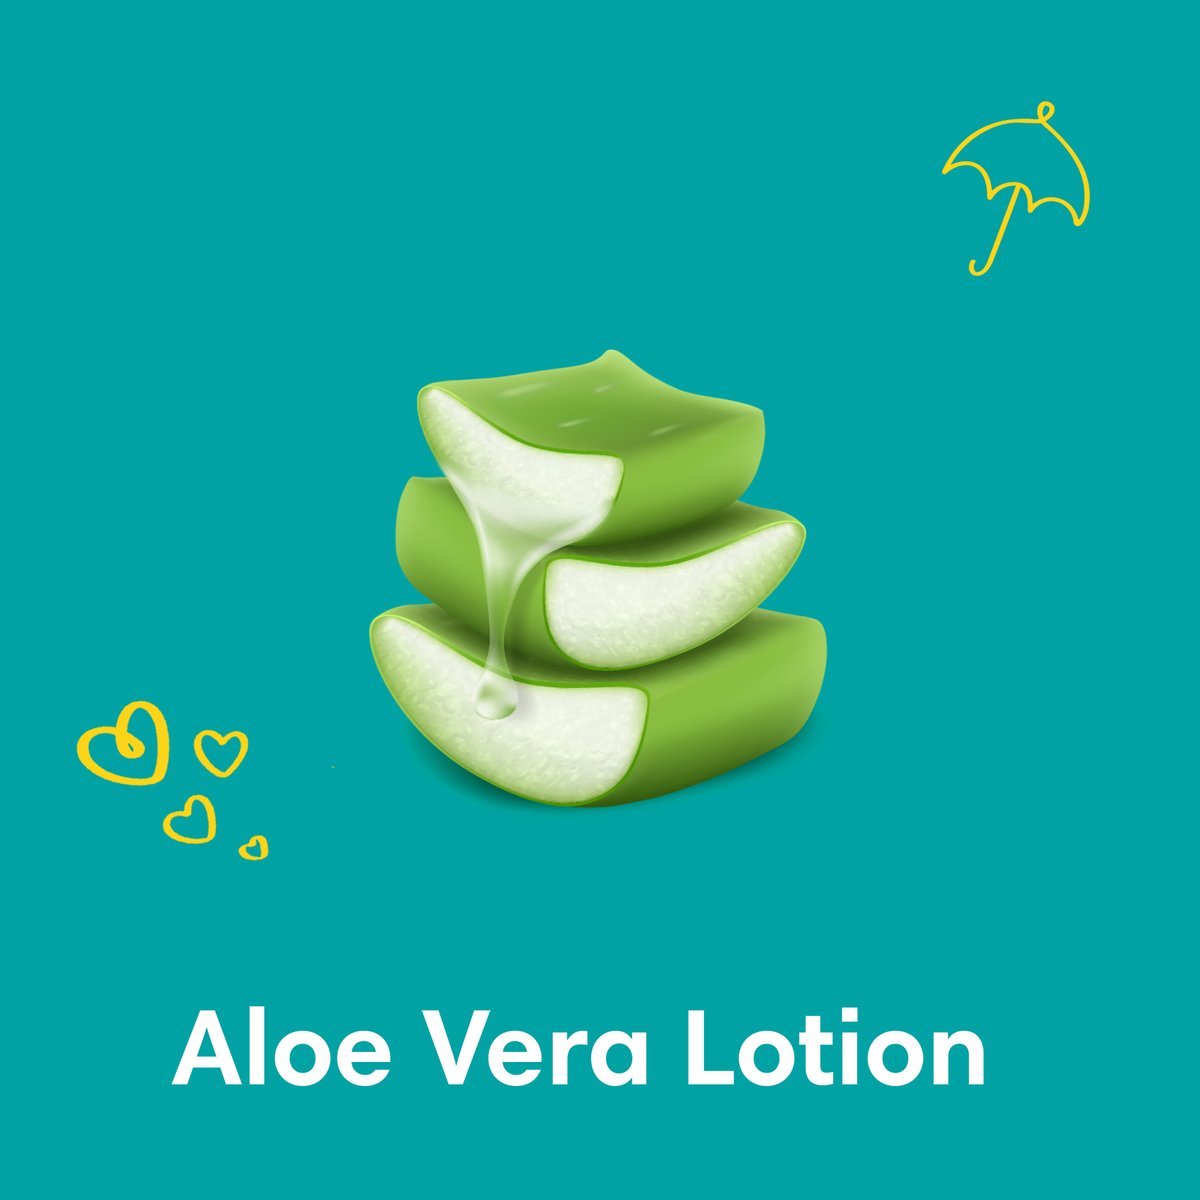 Pampers Baby-Dry Taped Diapers with Aloe Vera Lotion, Leakage Protection Size 4+ 10-15kg 74 pcs